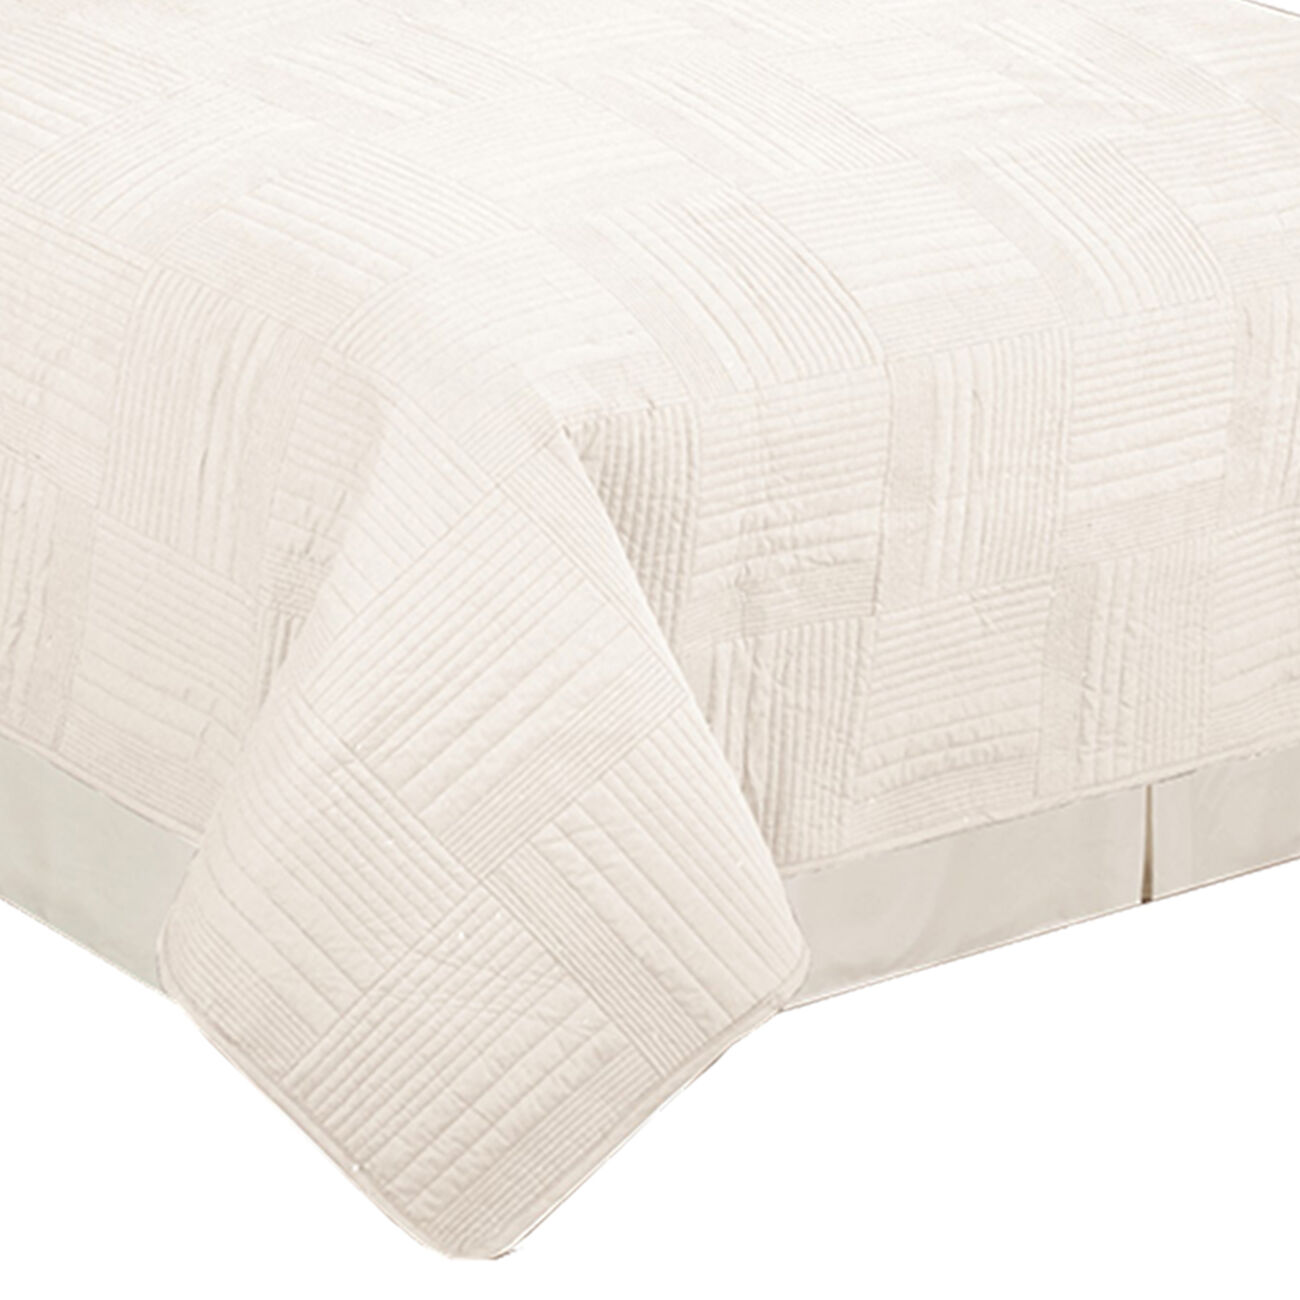 3 Piece Queen Quilt Set with Vertical and Horizontal Stitched Details,White